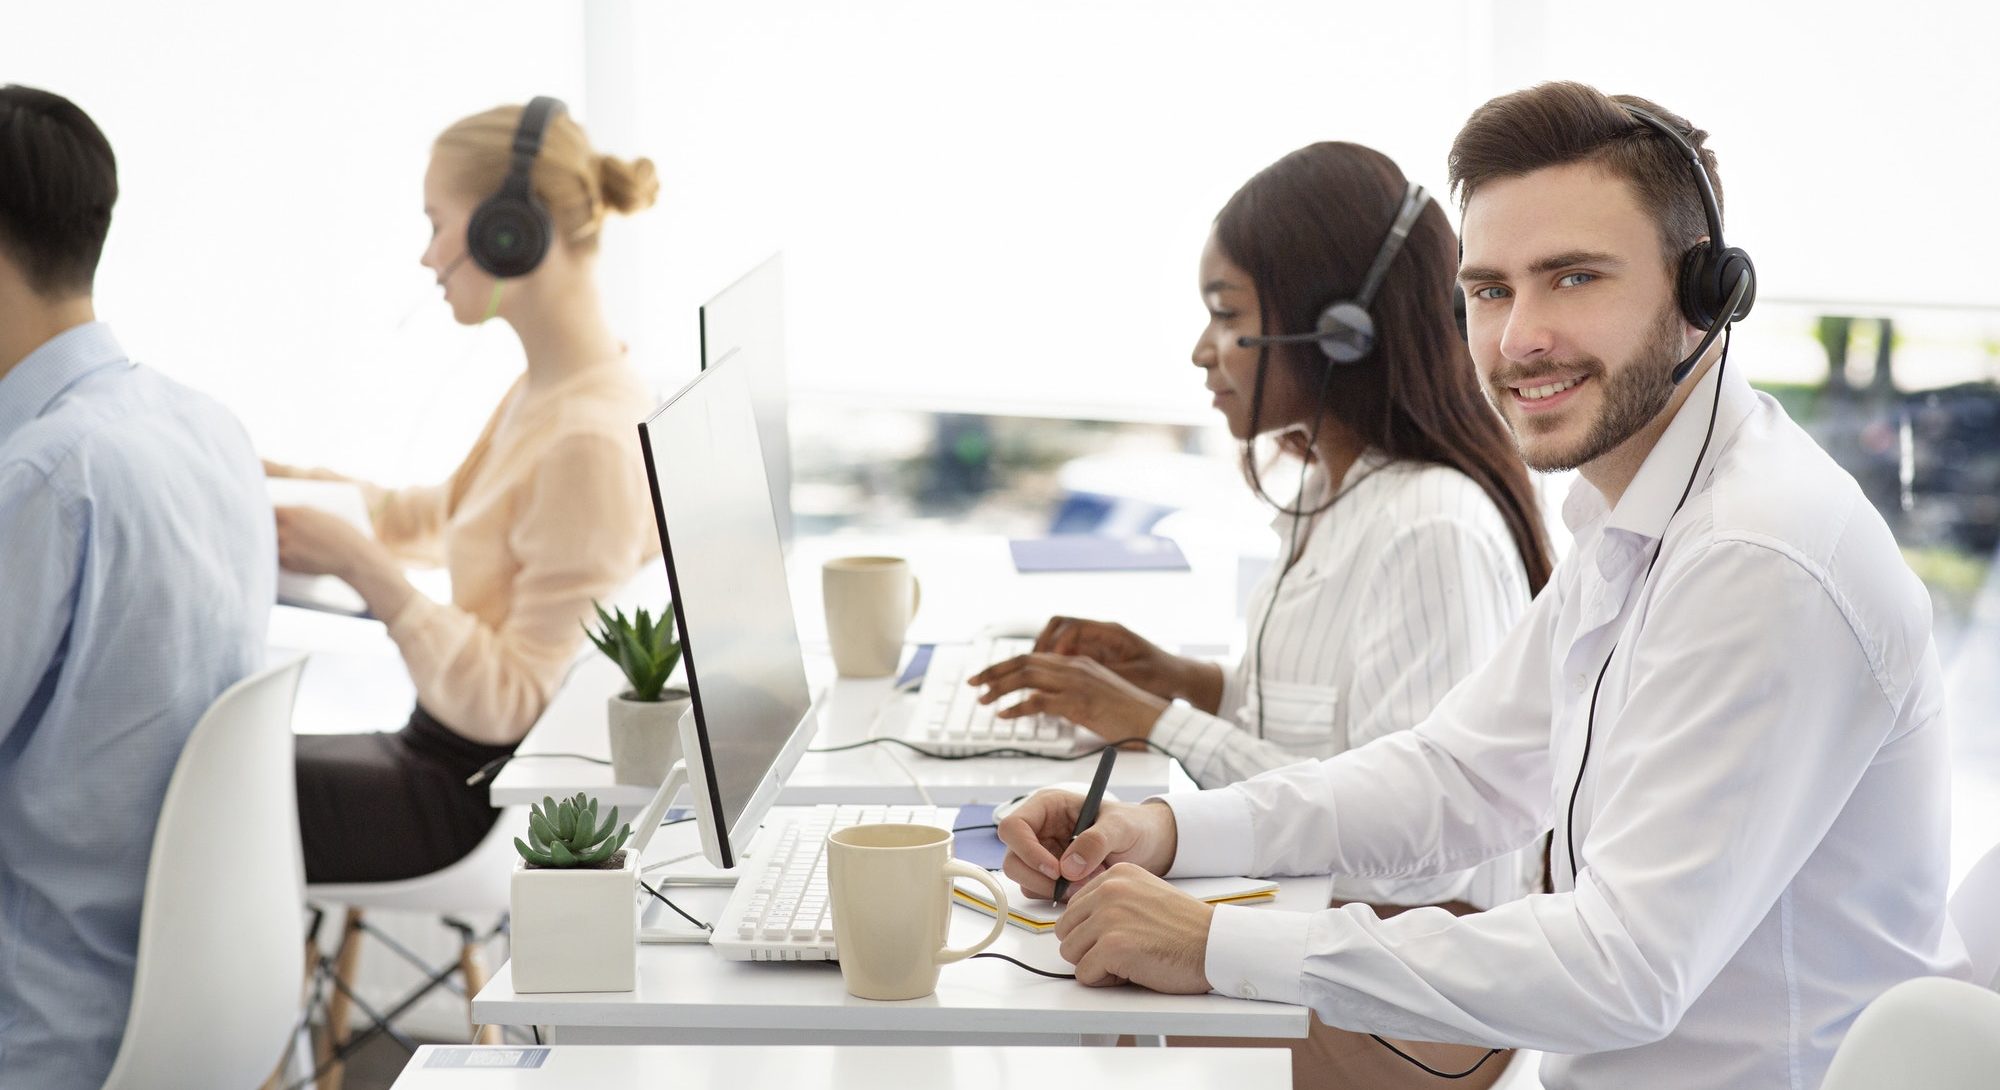 Diverse customer service operators helping clients, resolving technical issues or selling goods at